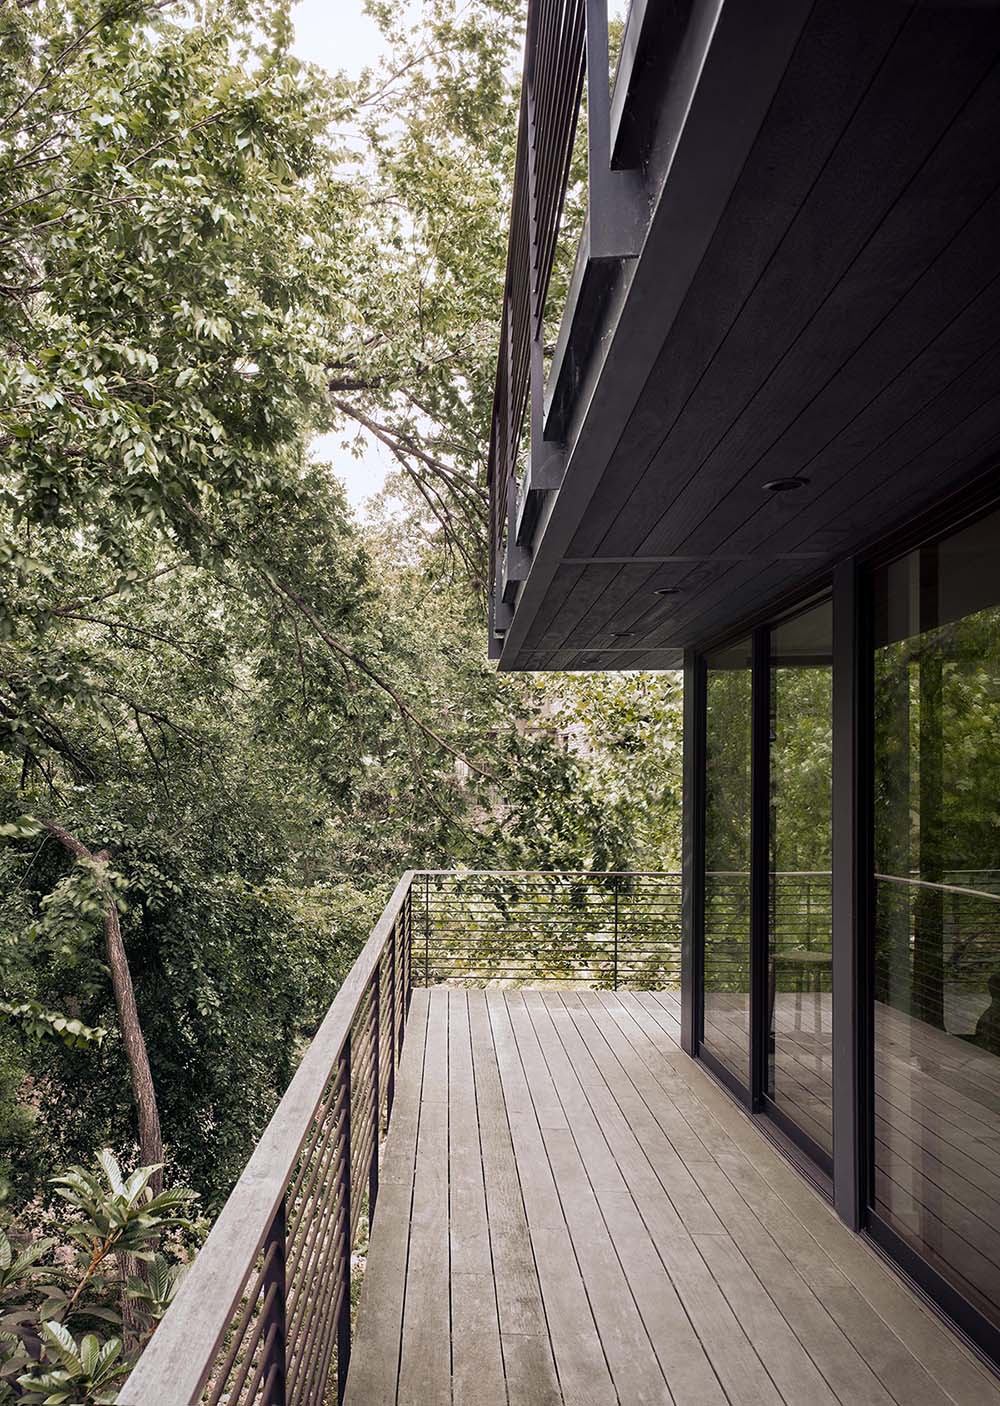 A wrap-around deck provides views of the trees, with a staircase the allows for easy access around the property.